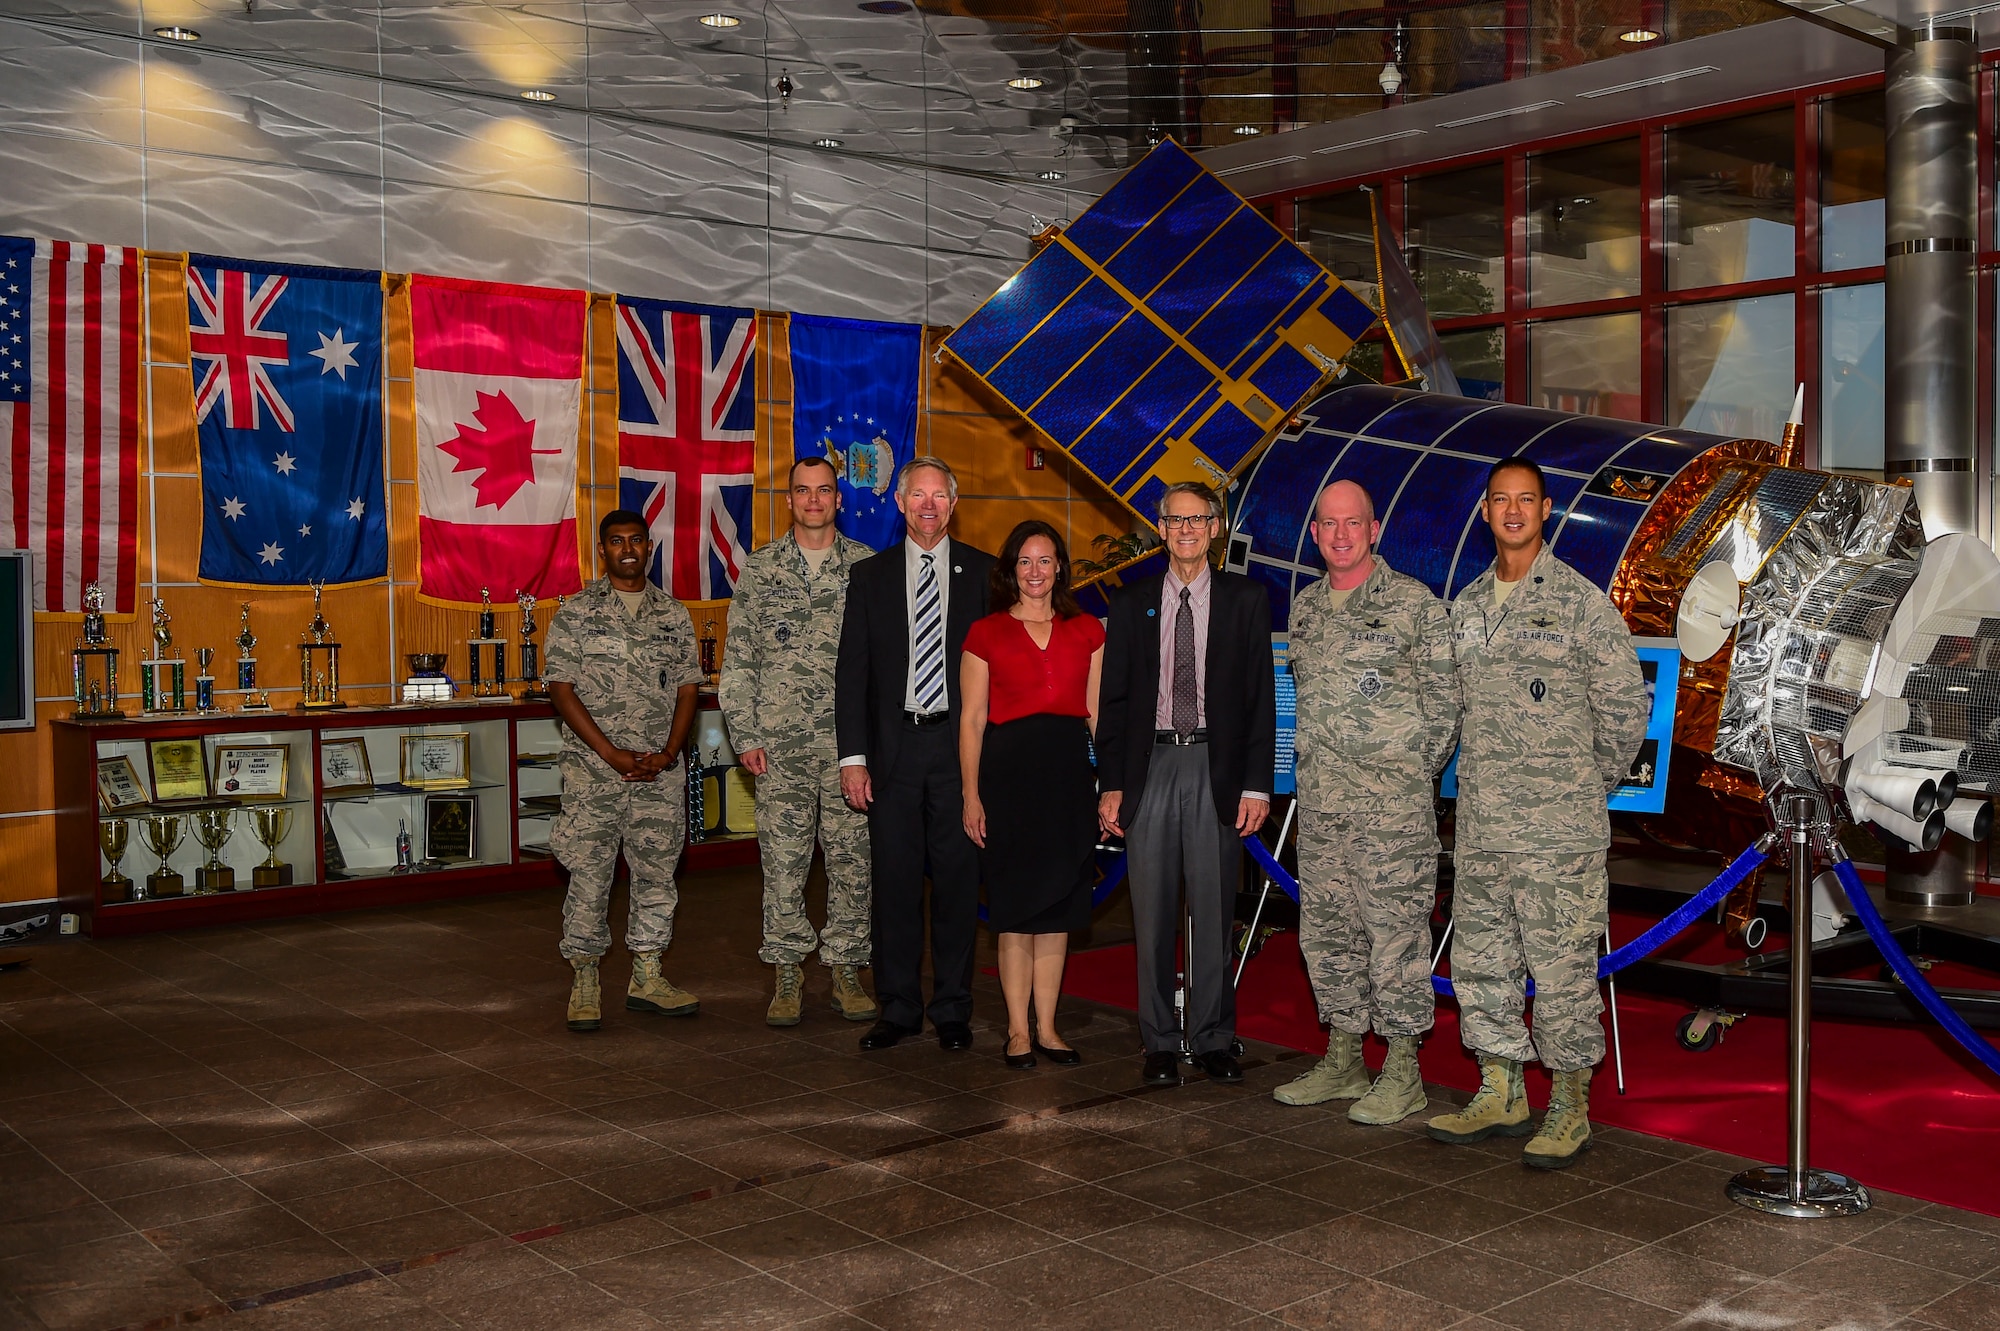 As mayor of Colorado’s third-largest city, LeGare visited Buckley AFB to gain a better understanding of the mission, and to strengthen the relationship between the 460th SW and the city of Aurora